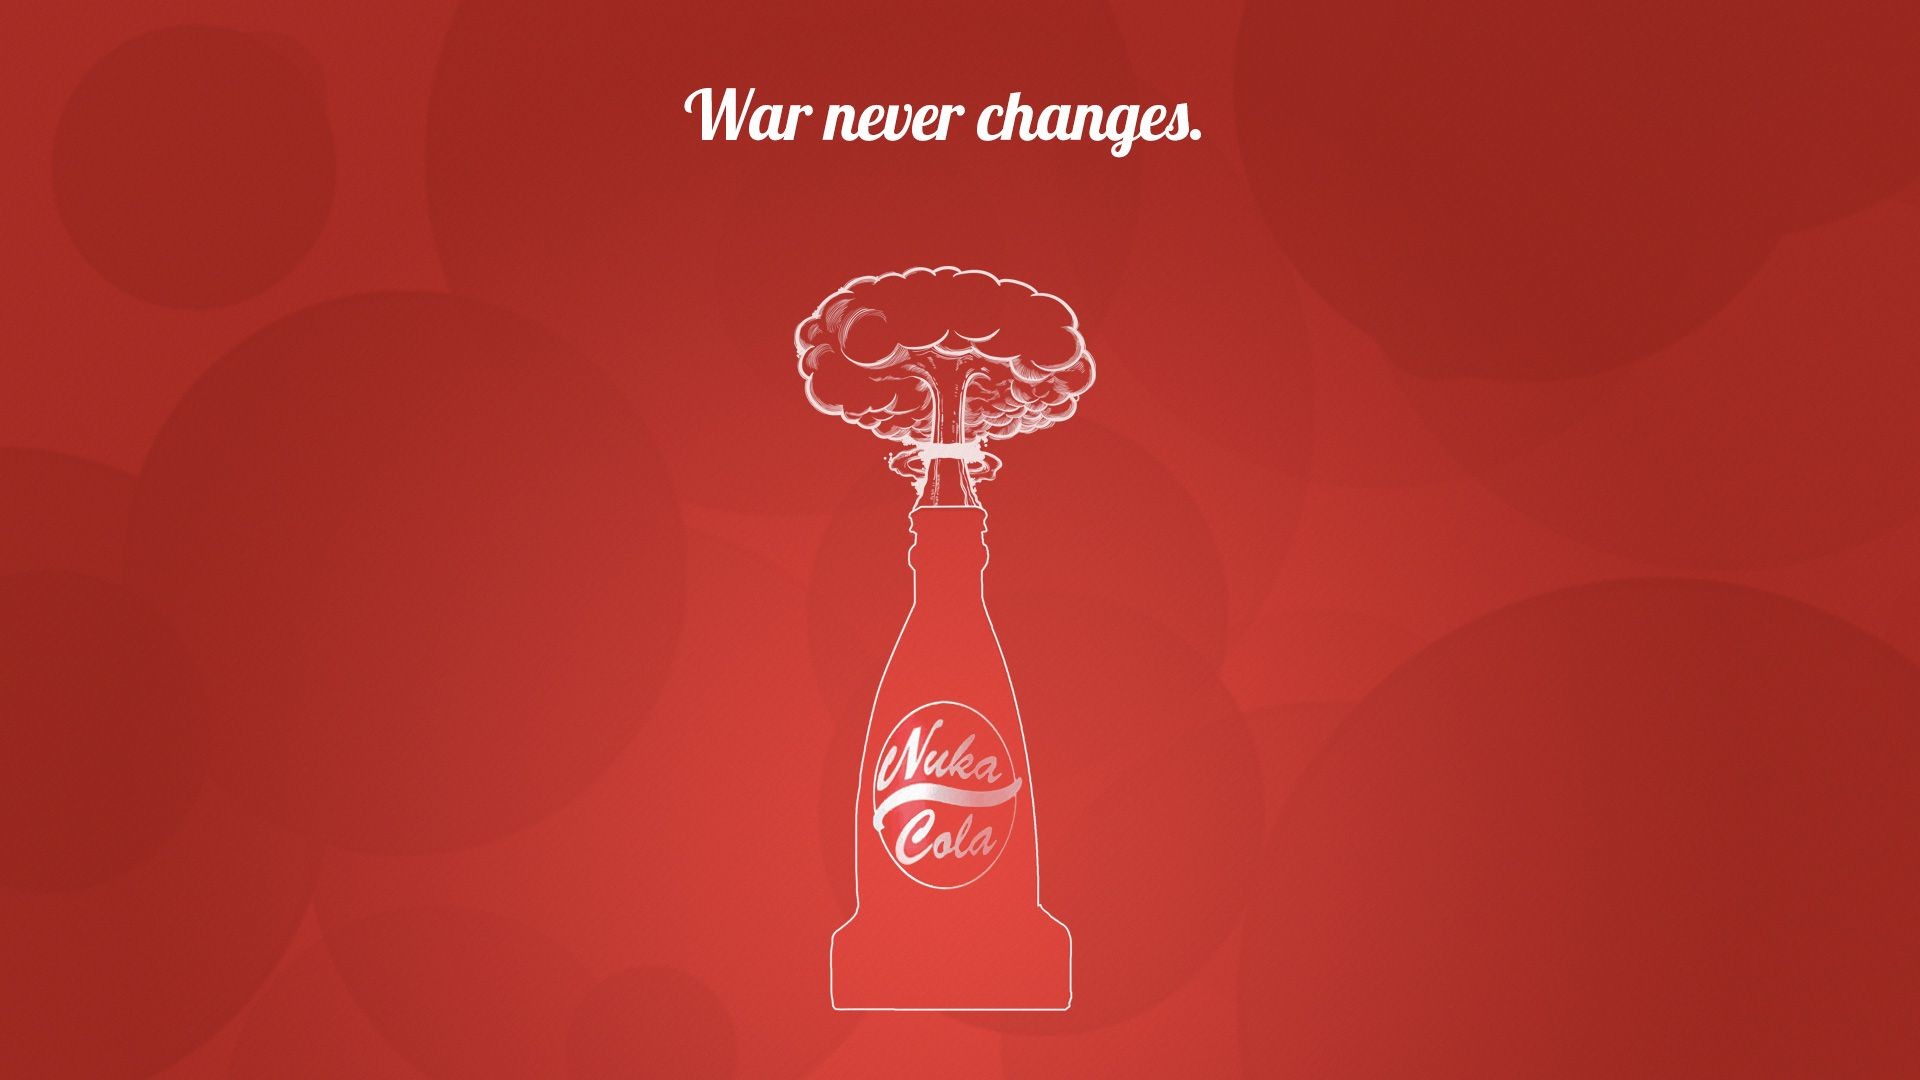 1920x1080  Fallout 4 Nuka Cola Wallpapers - Mobile and Desktop Versions .